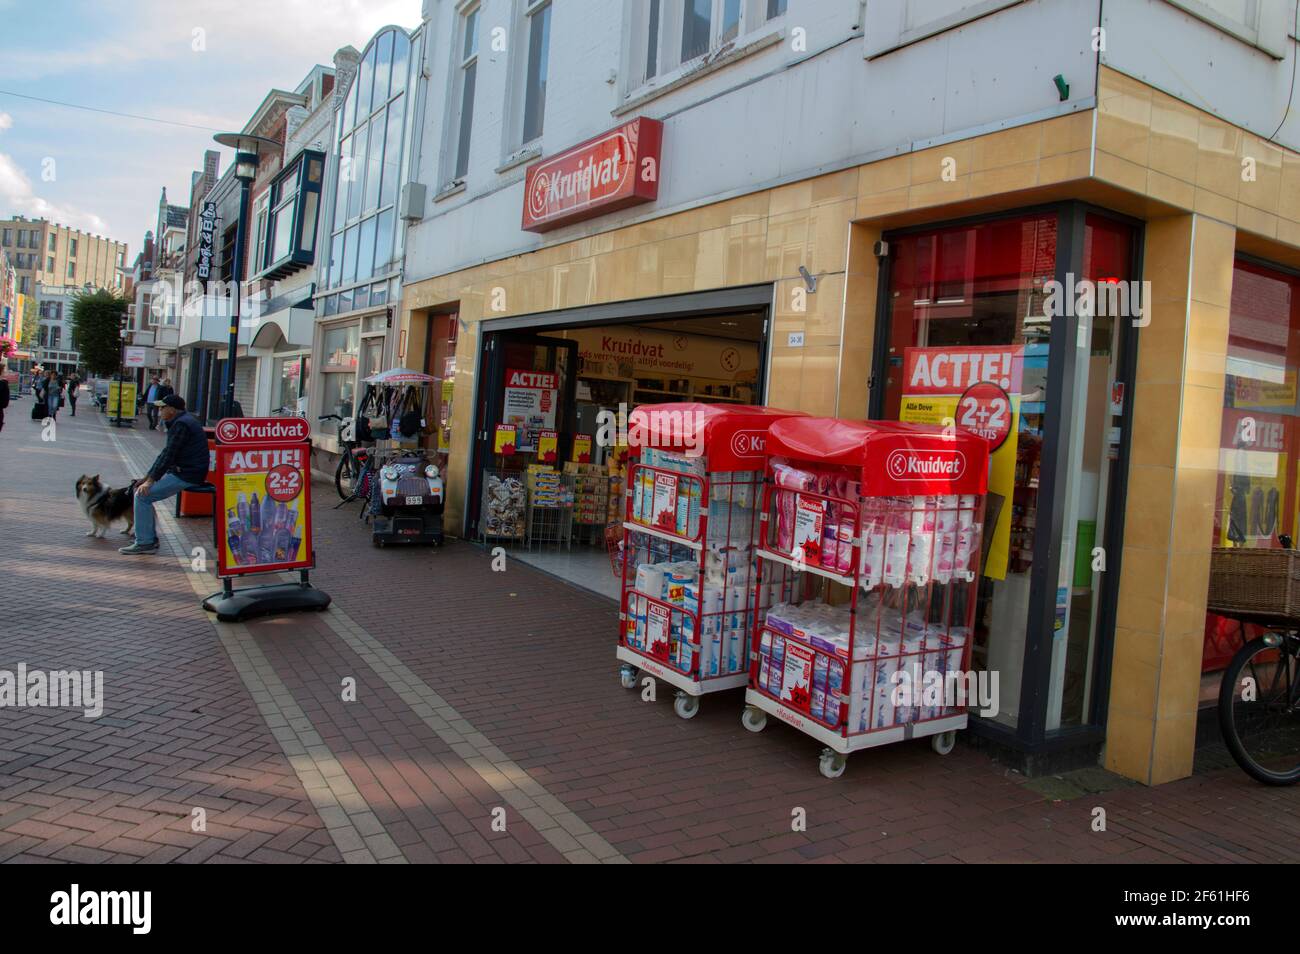 Store At Helder The Netherlands 23-9-2019 Stock Photo - Alamy